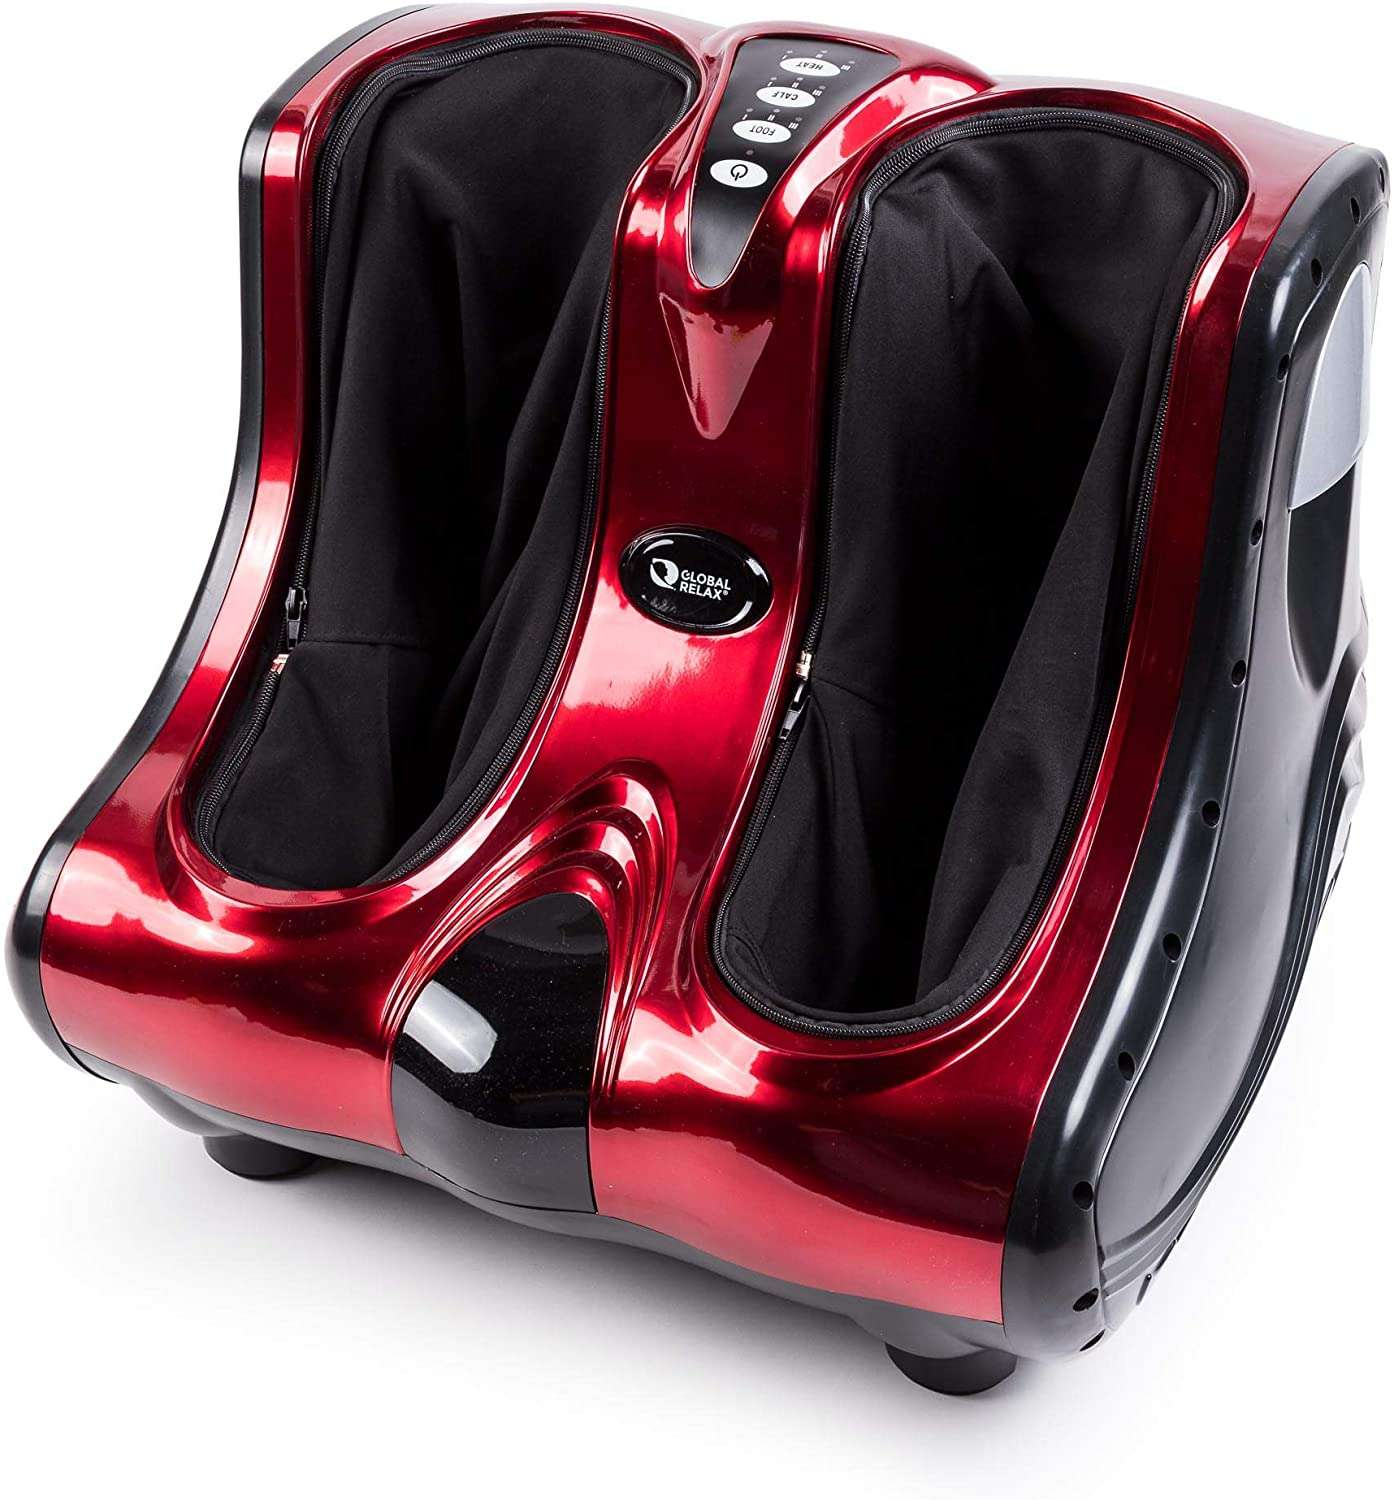 The best foot massager in UK 2021